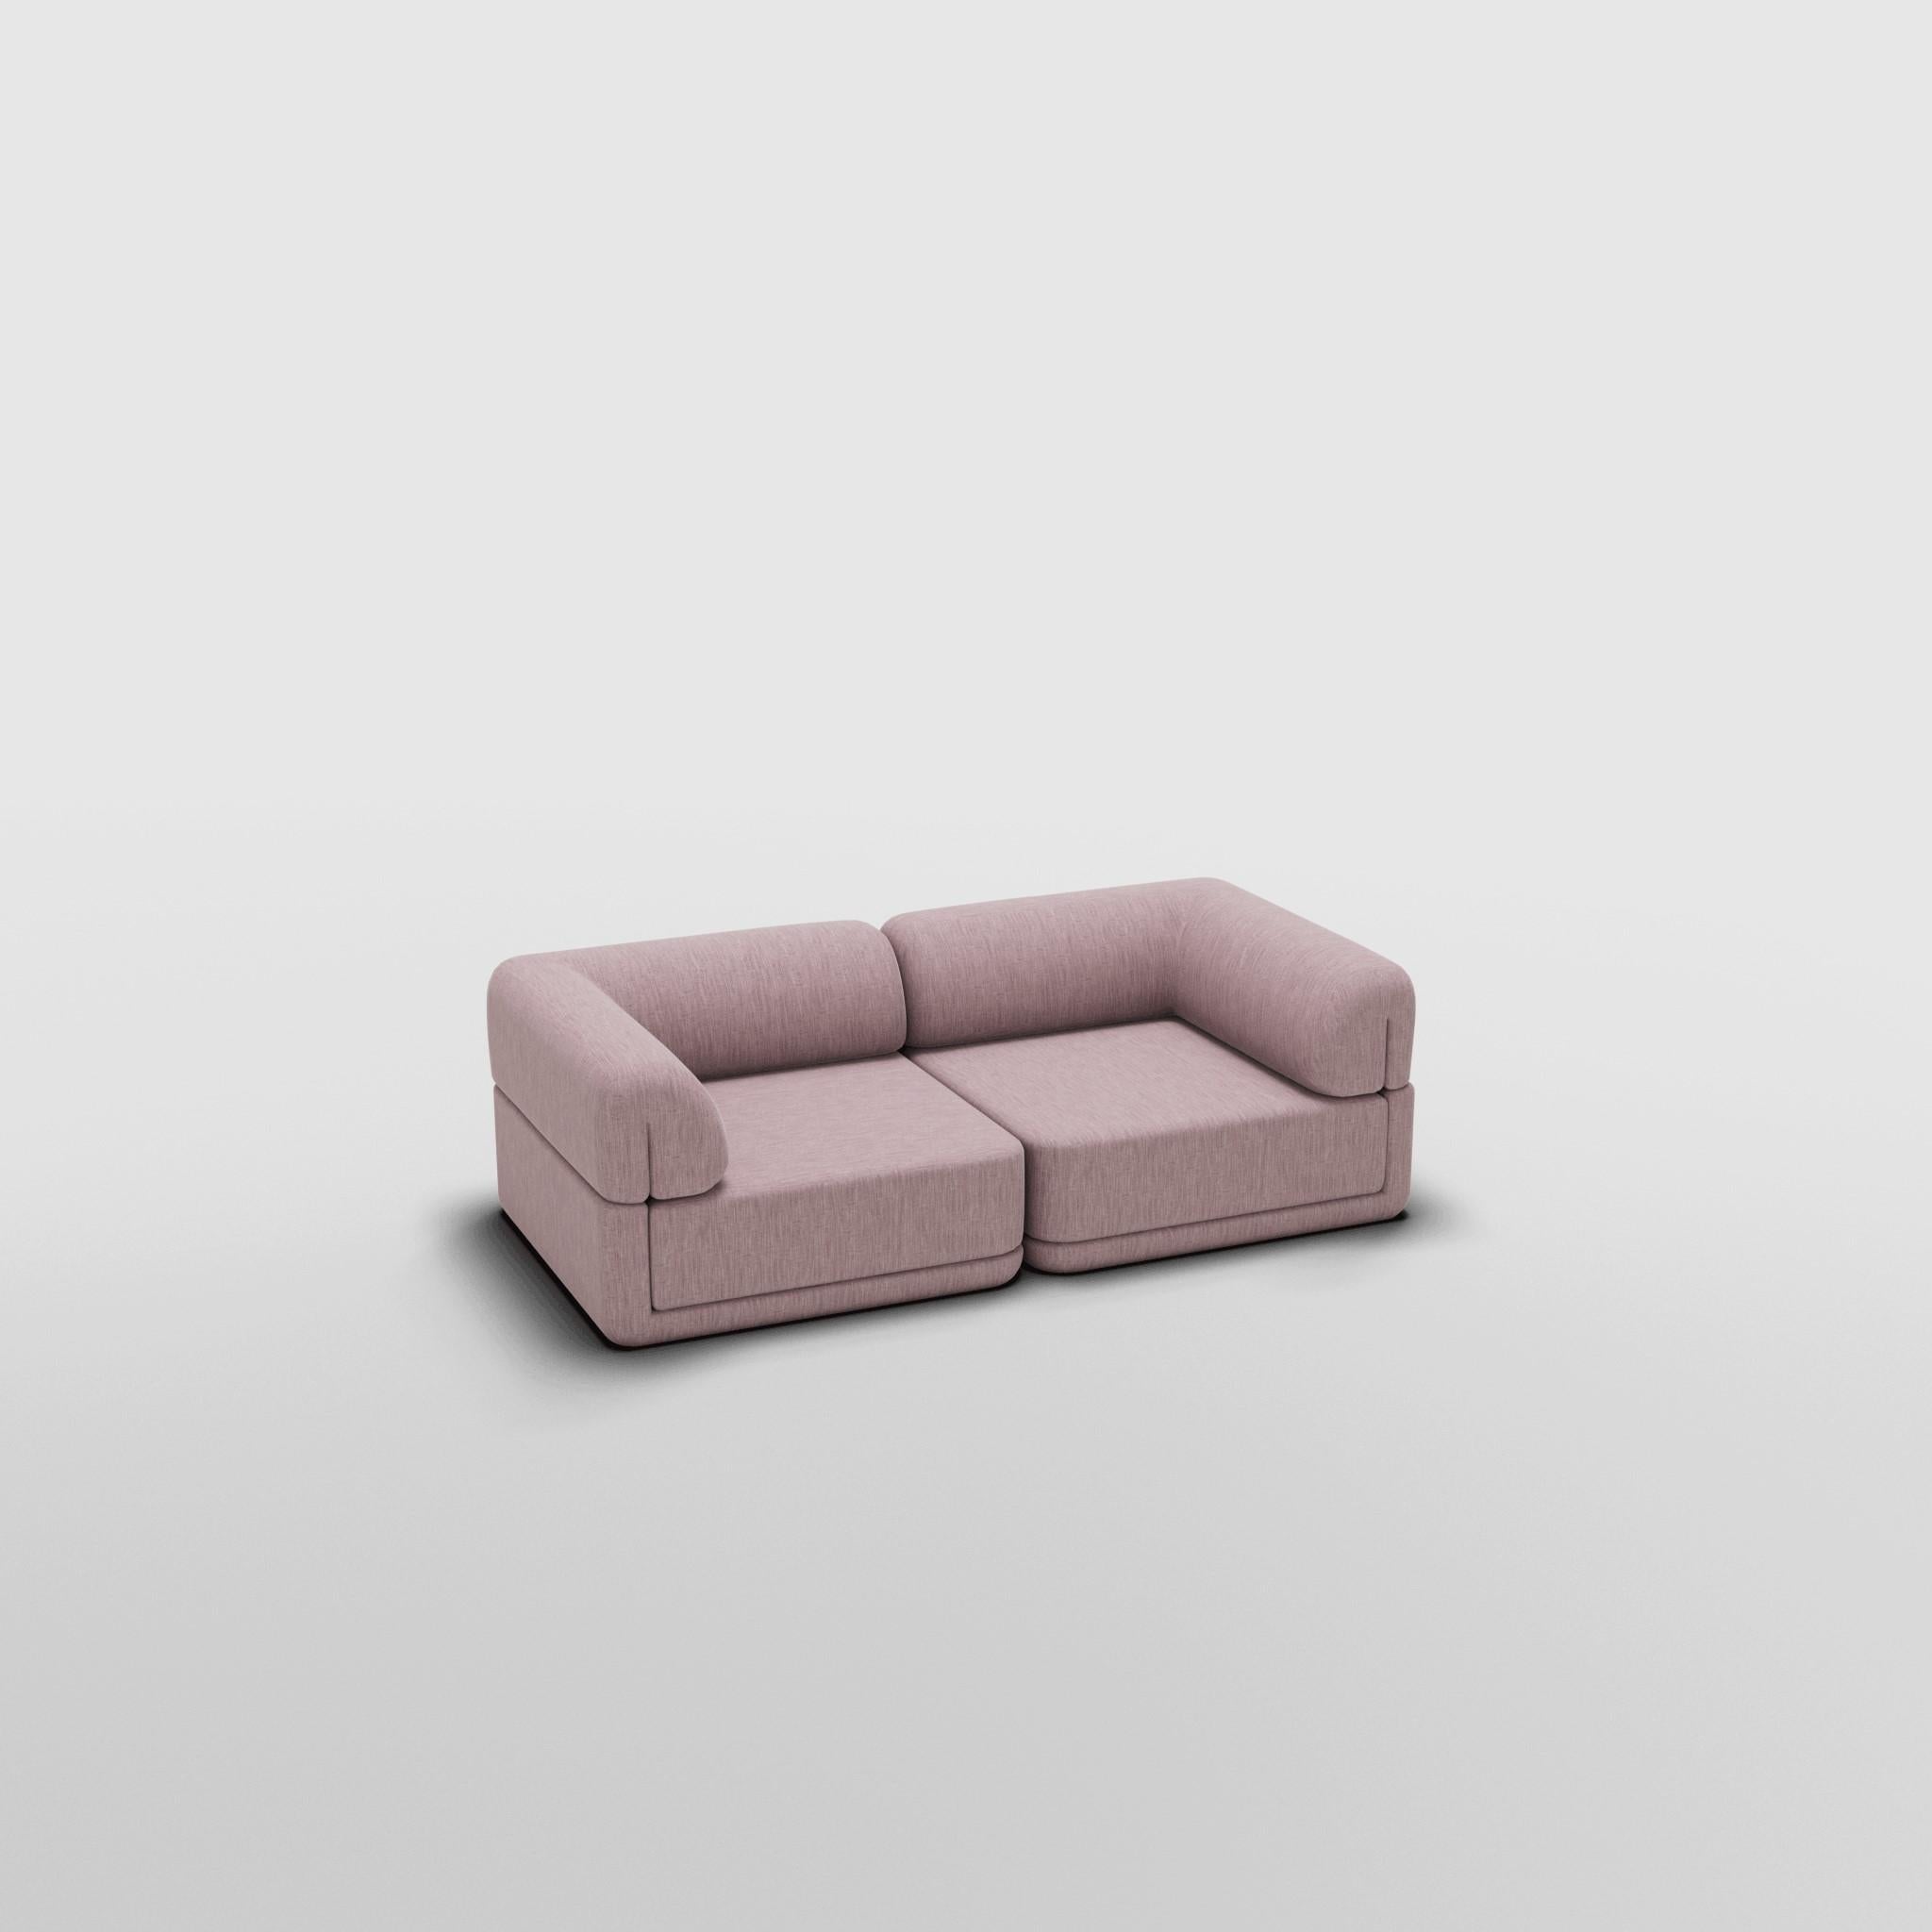 The Cube Sofa - Corner Lounge Set In New Condition For Sale In Ontario, CA